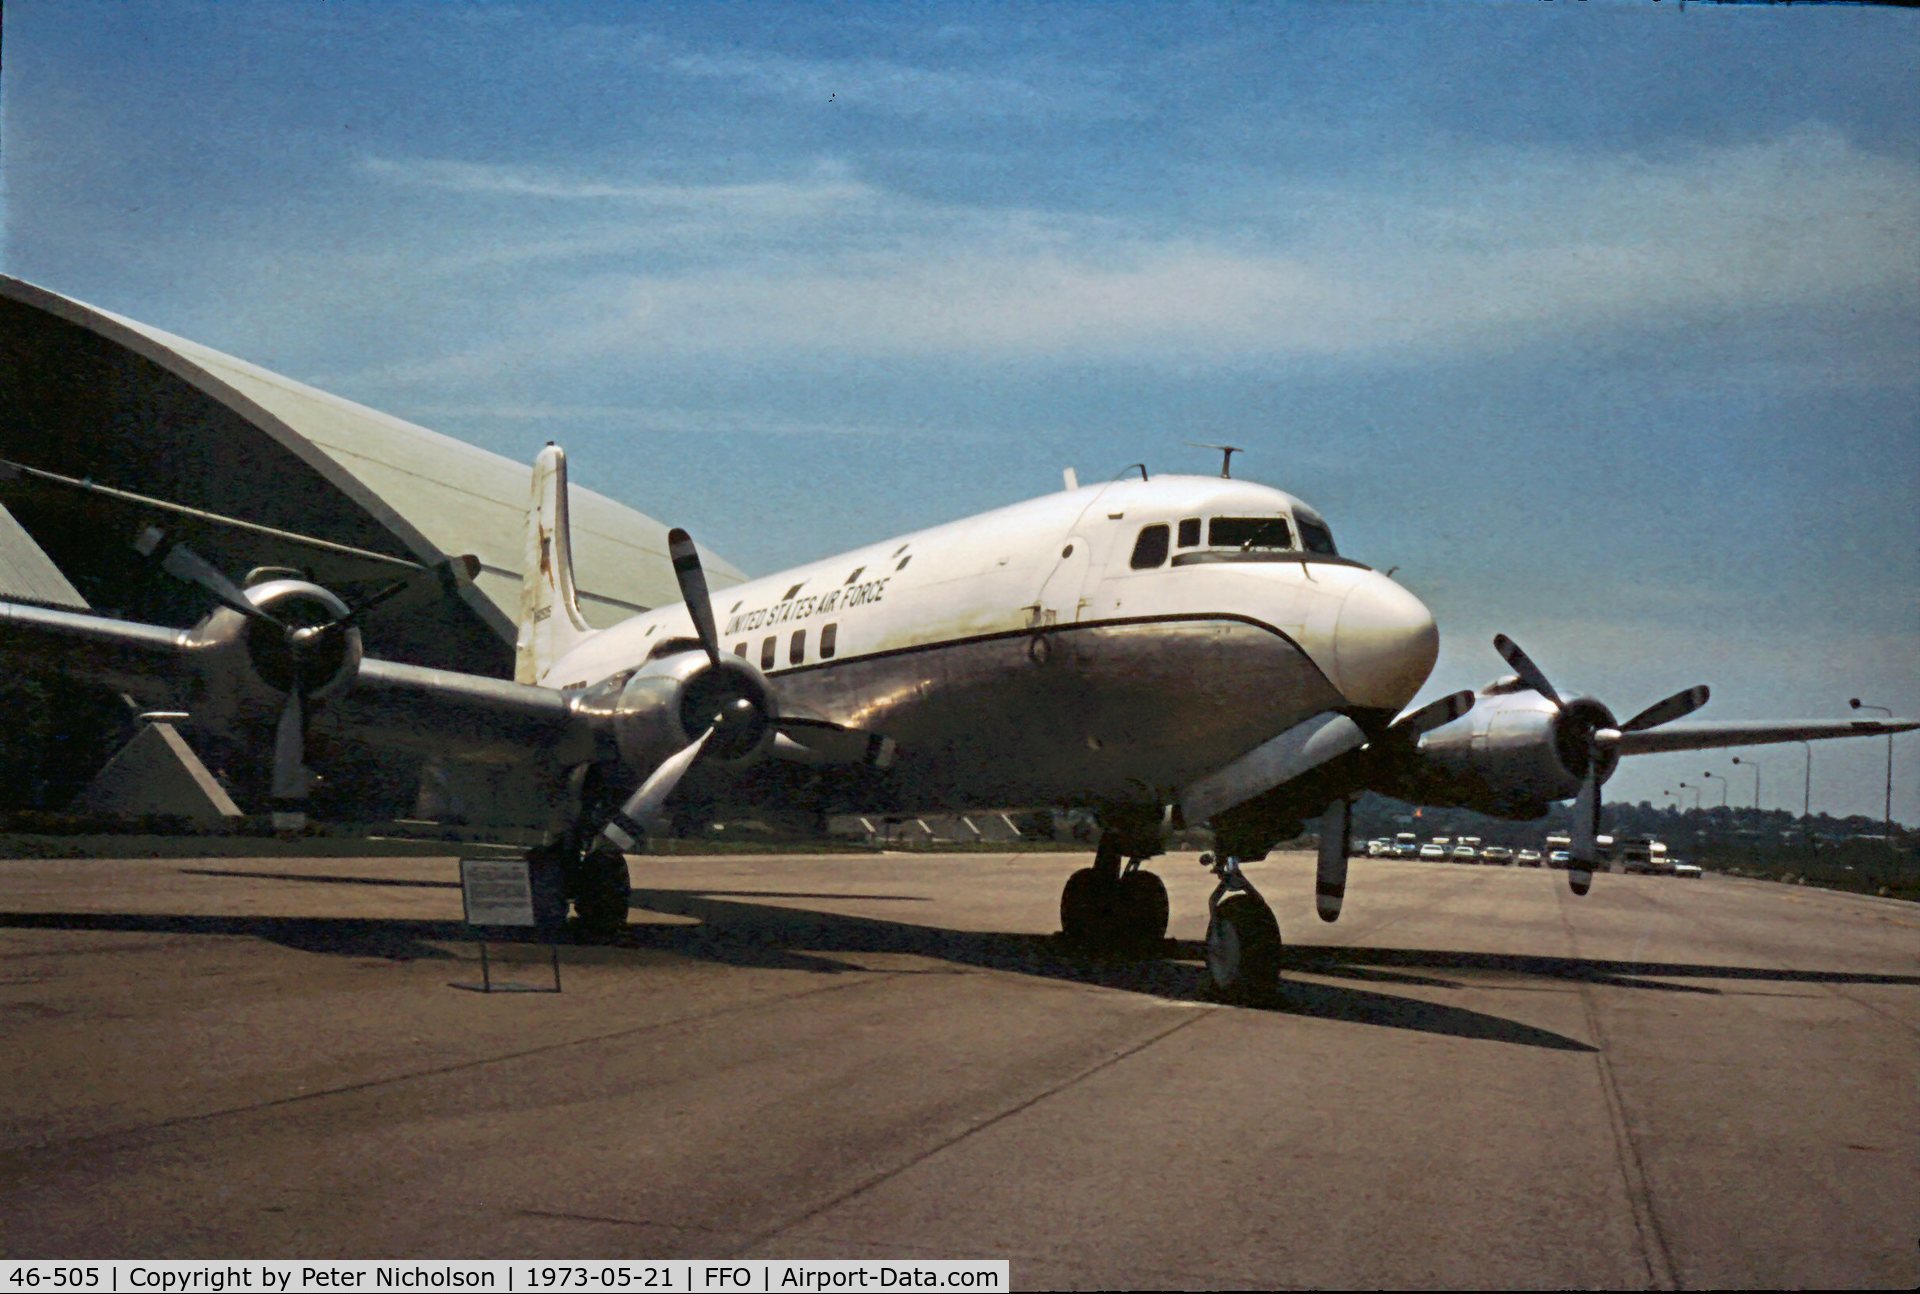 46-505, 1947 Douglas VC-118A Liftmaster C/N 42881, As displayed in the summer of 1973.